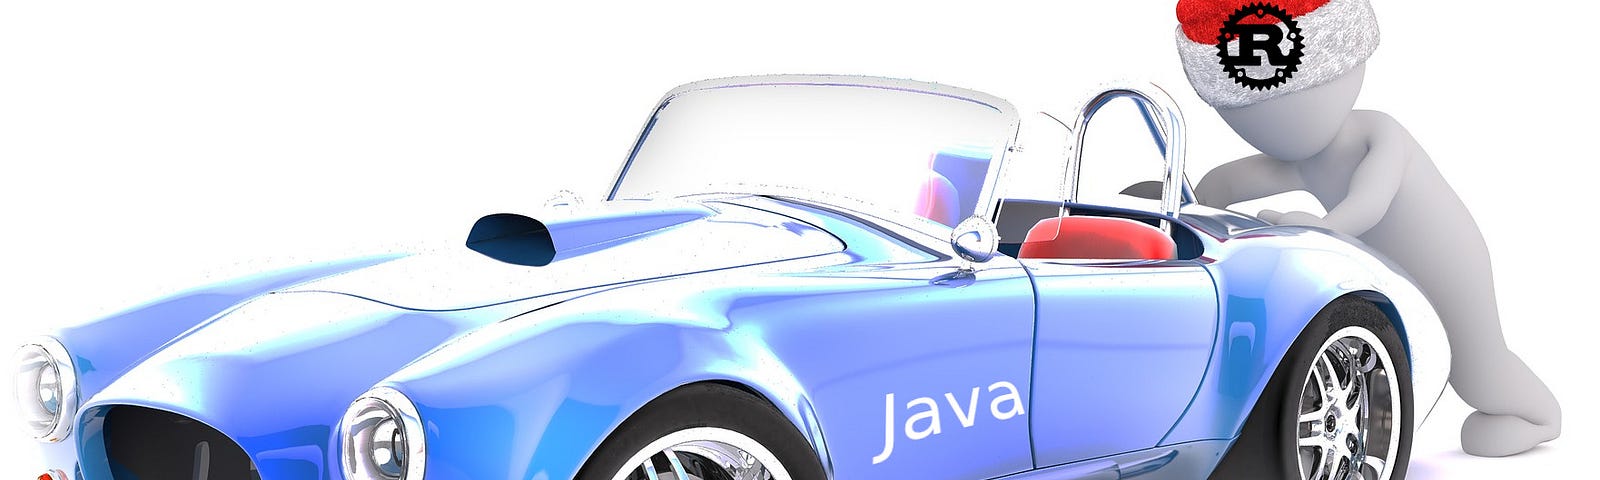 A 3d-model of a human with RustLang logo on a hat pushed the sports car with Java text on a side.